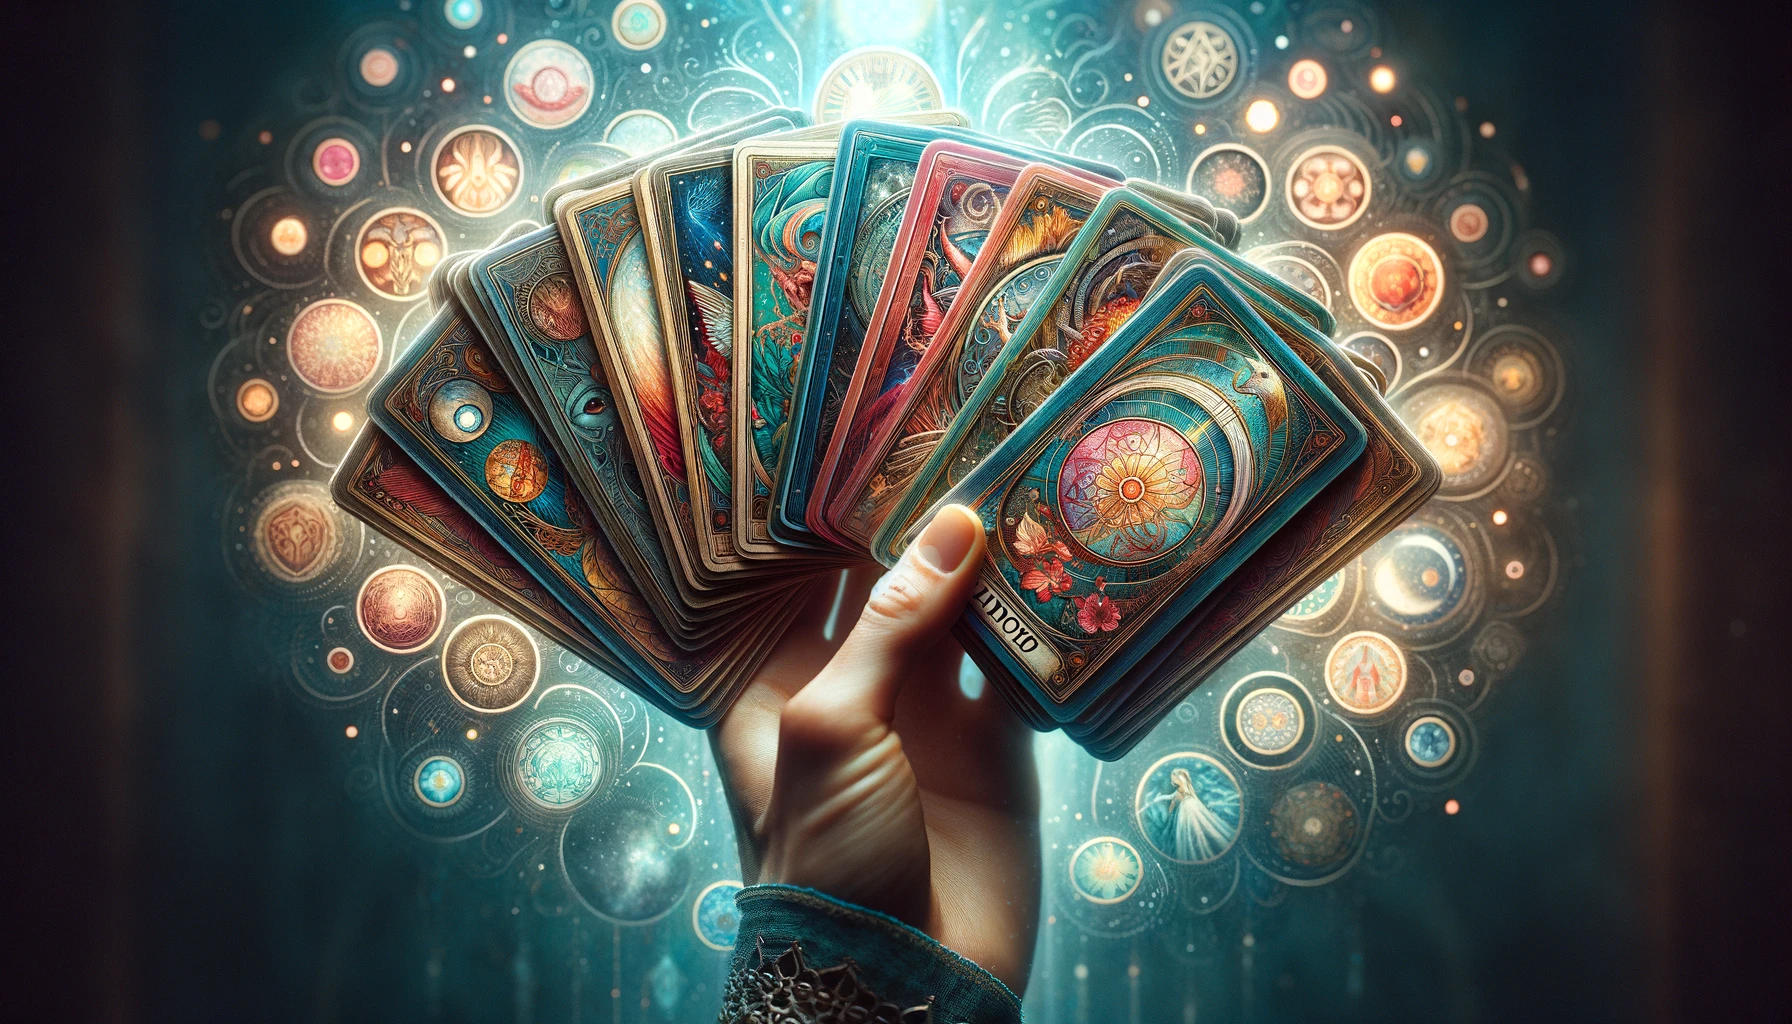 A hand gently holds a variety of vibrant intricately designed tarot cards showcasing their rich colors and detailed artwork. Each card is unique wi